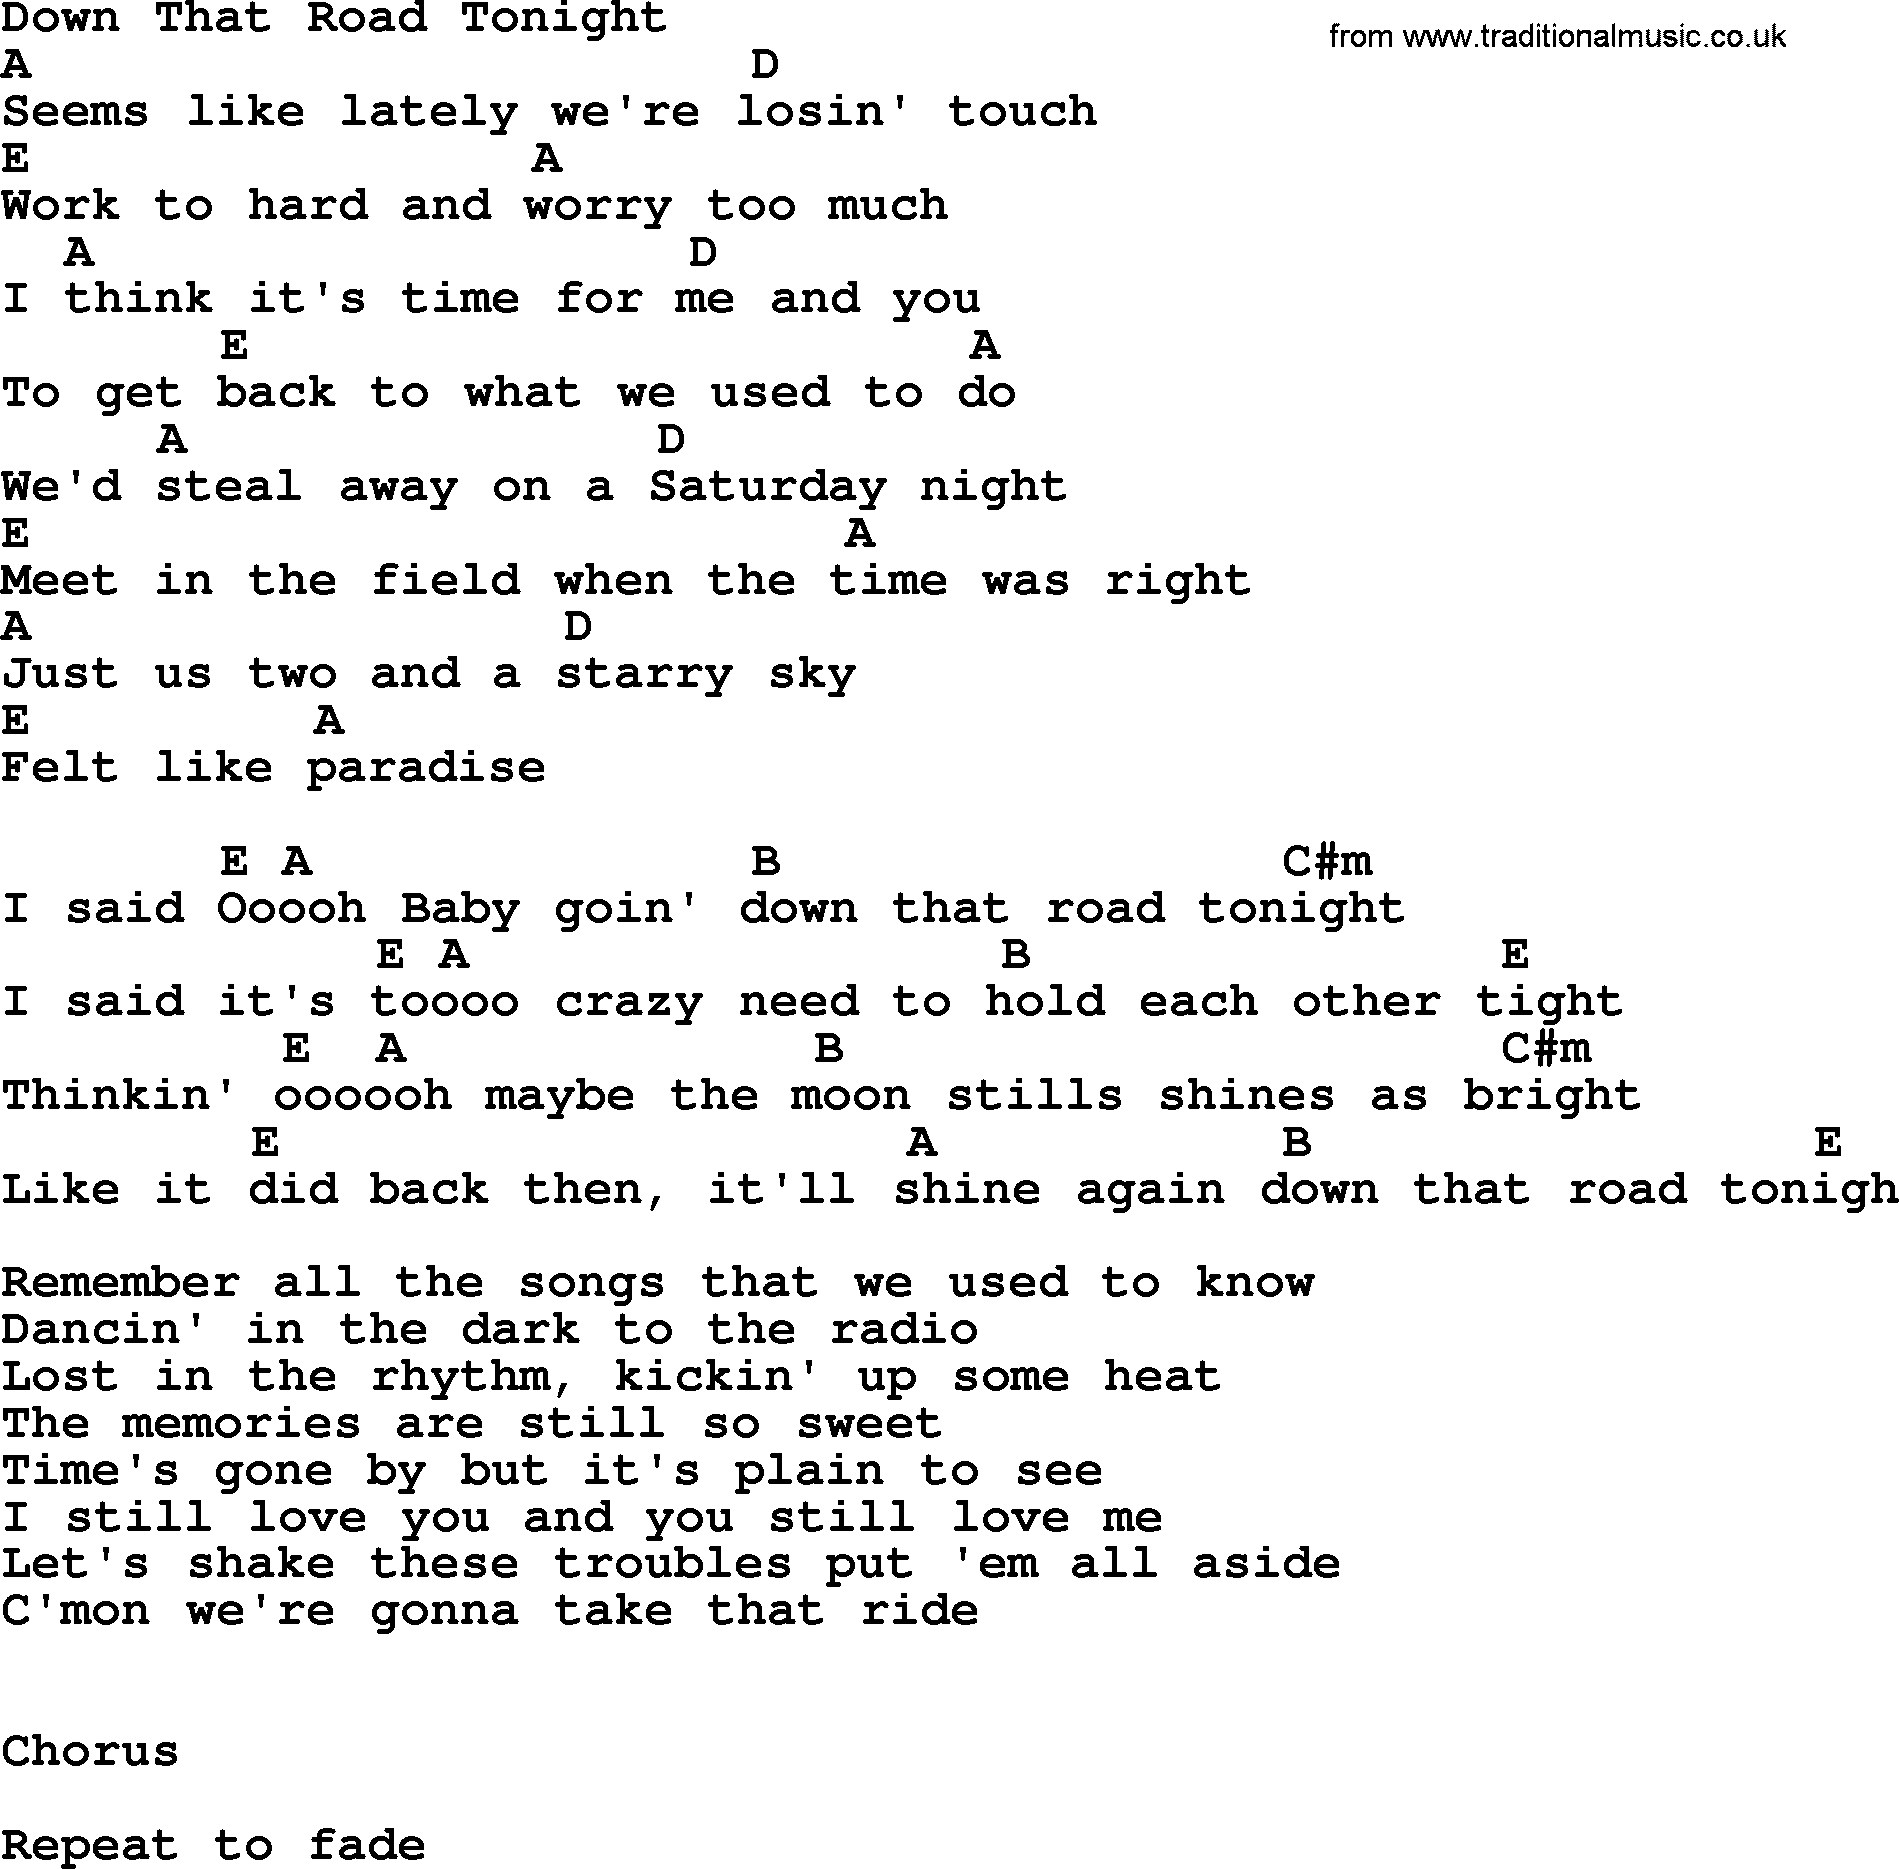 Bluegrass song: Down That Road Tonight, lyrics and chords